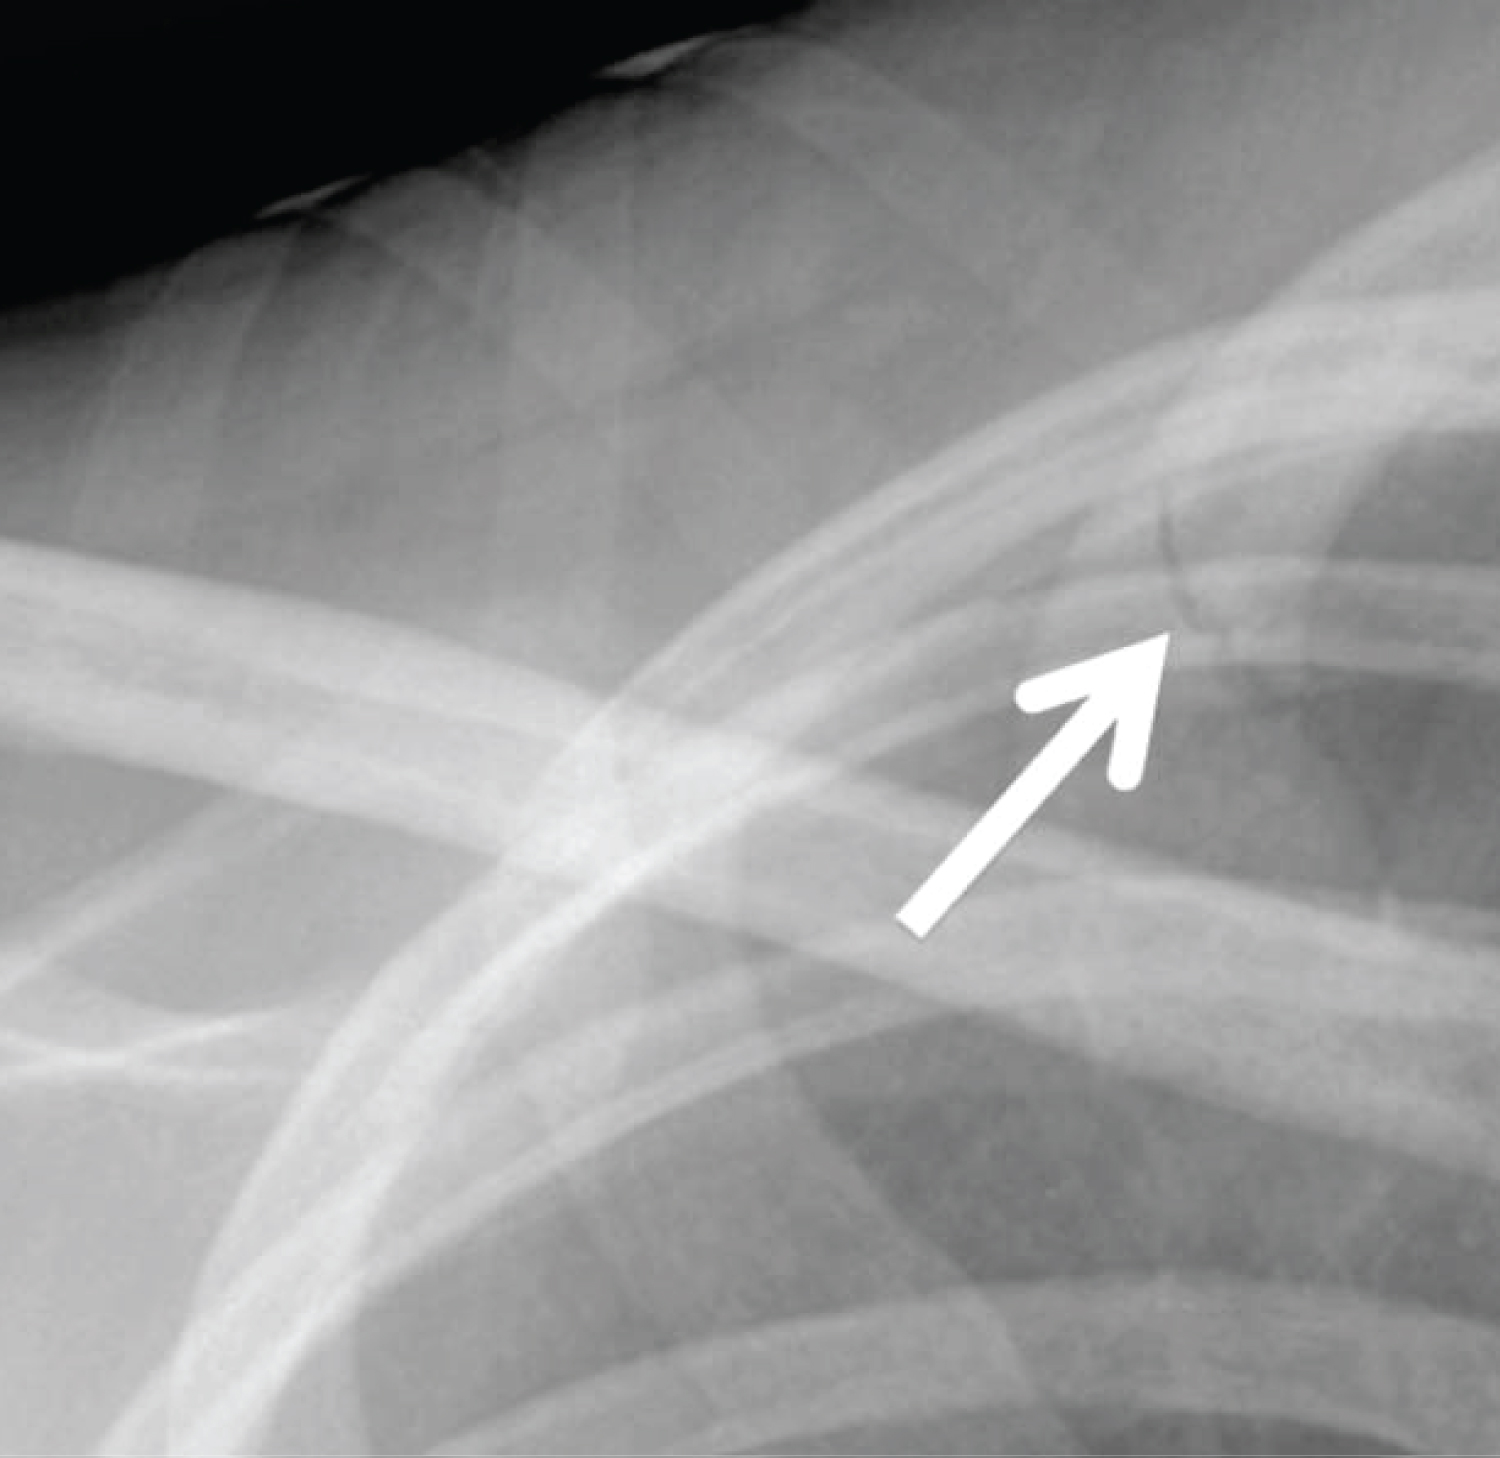 displaced rib fracture